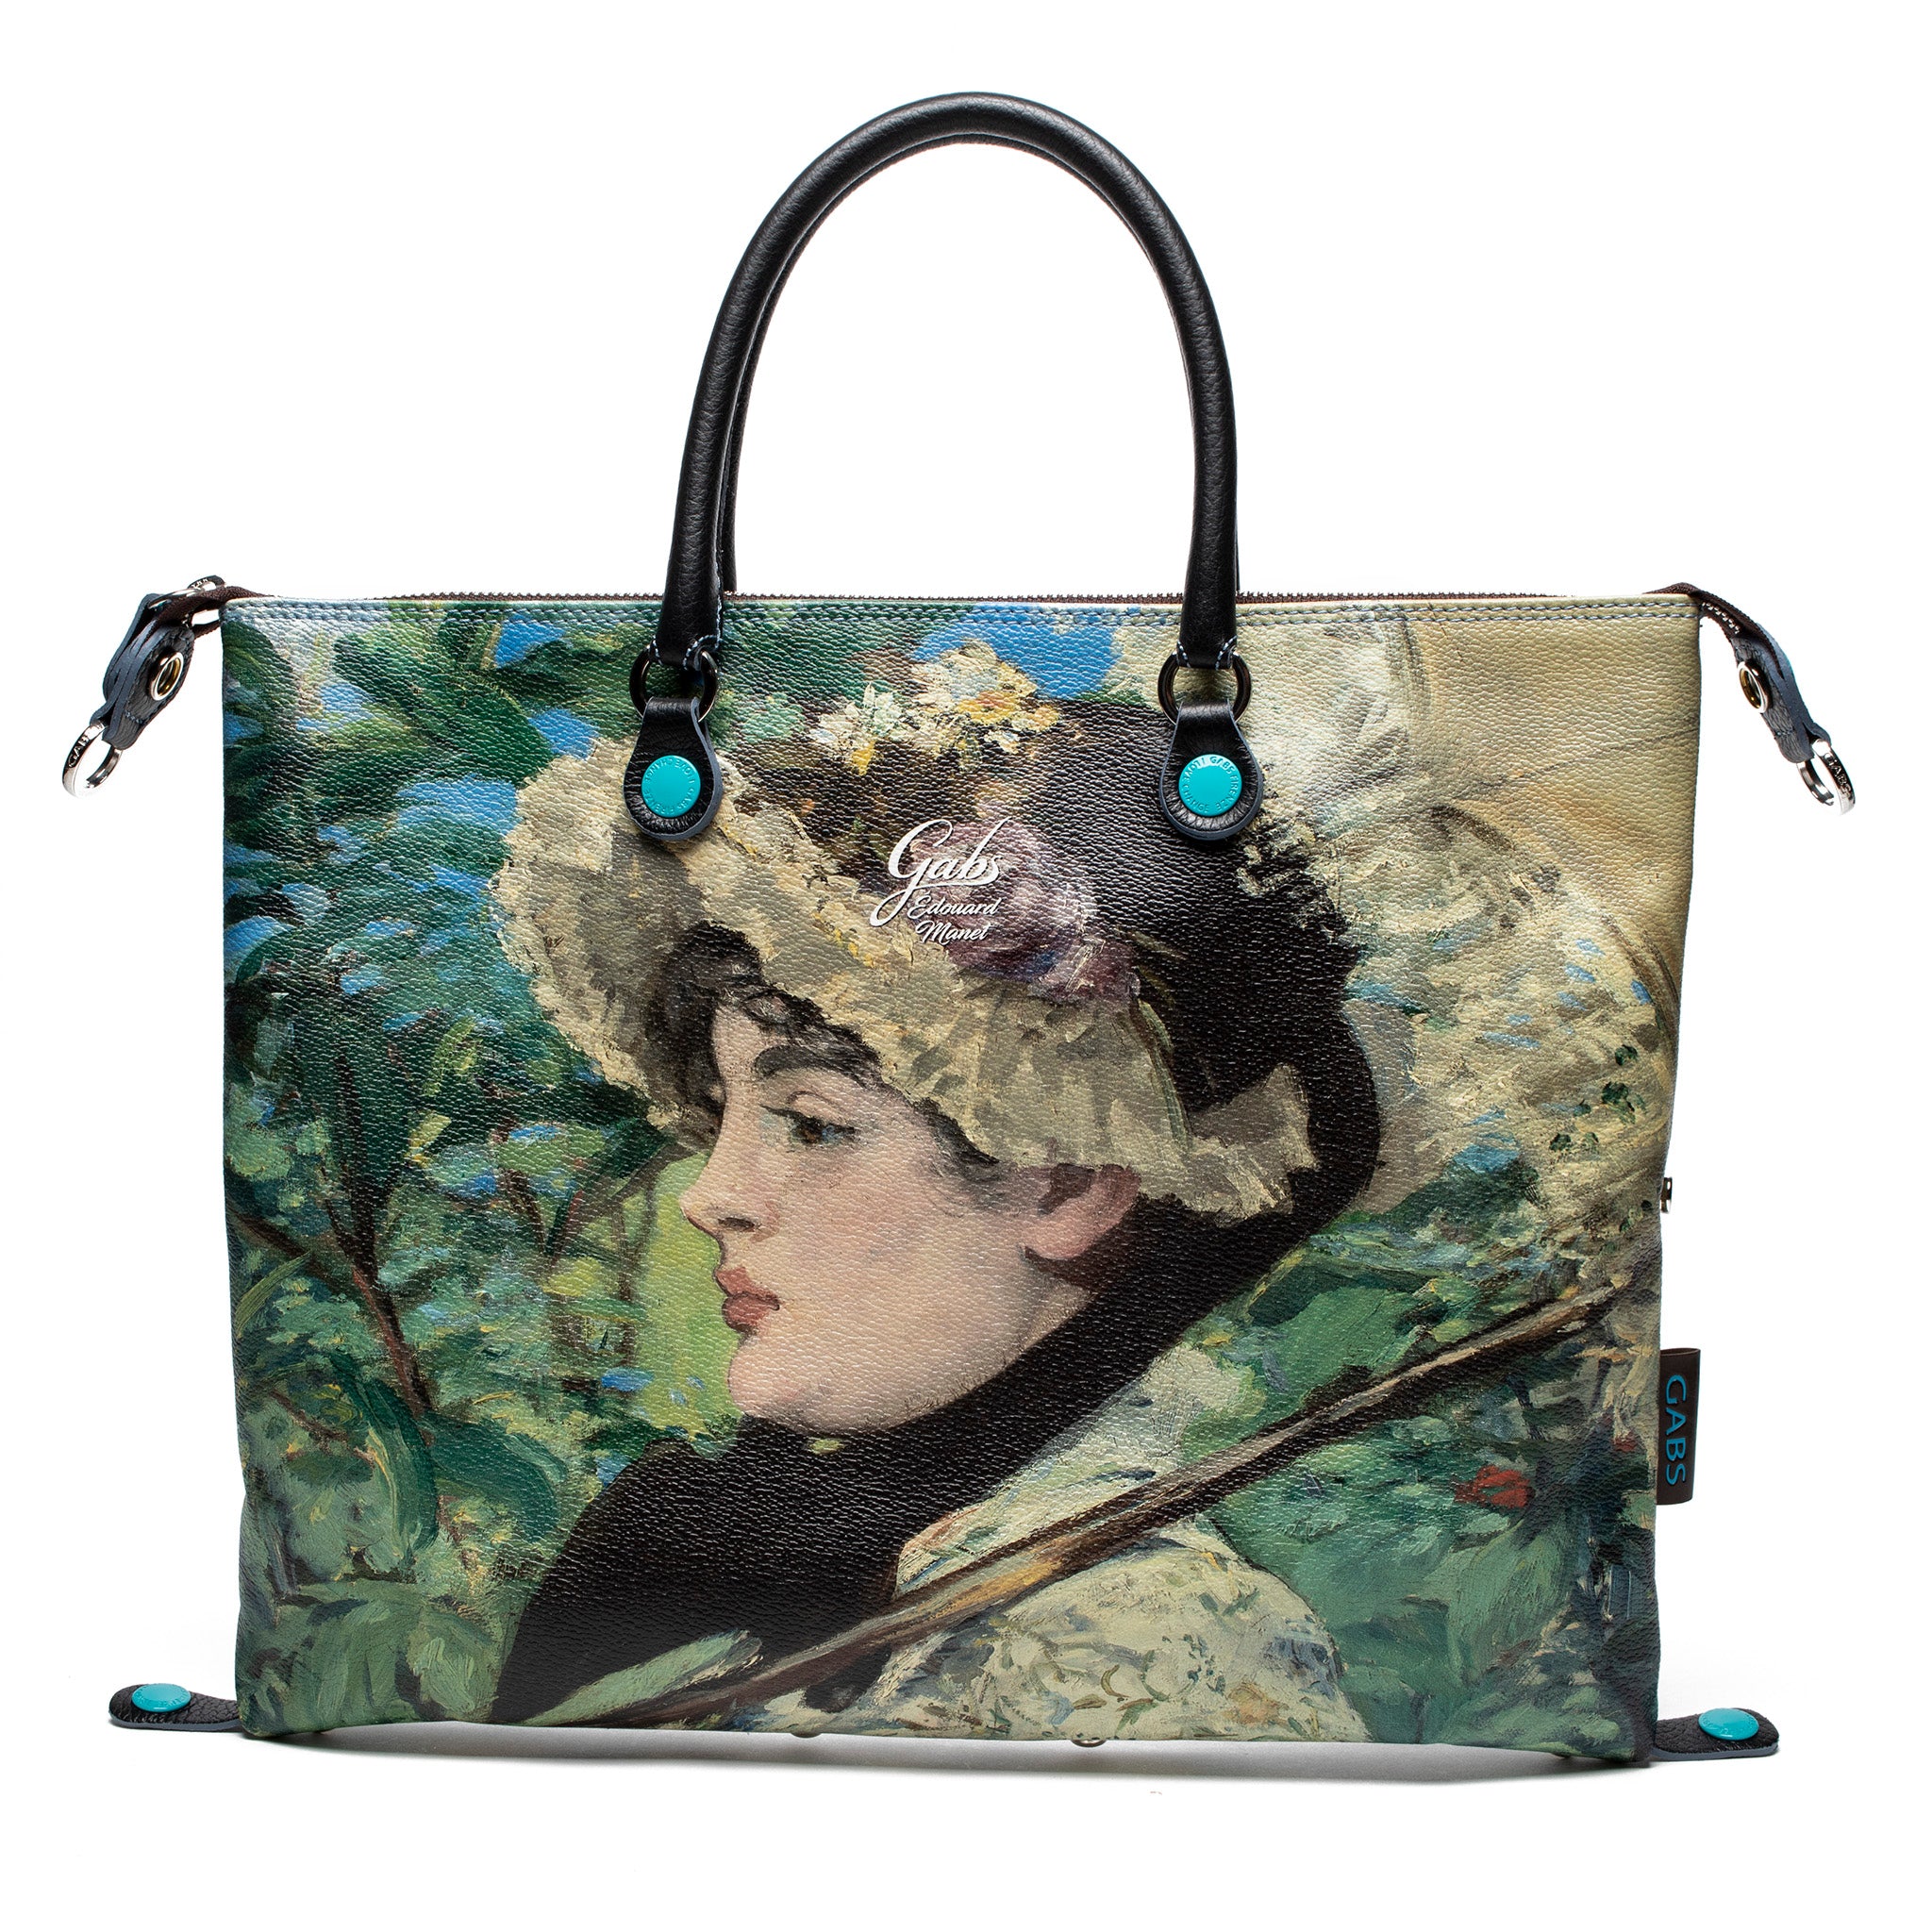 Small Convertible Hand Bag featuring Manet's Jeanne Spring by Gabs